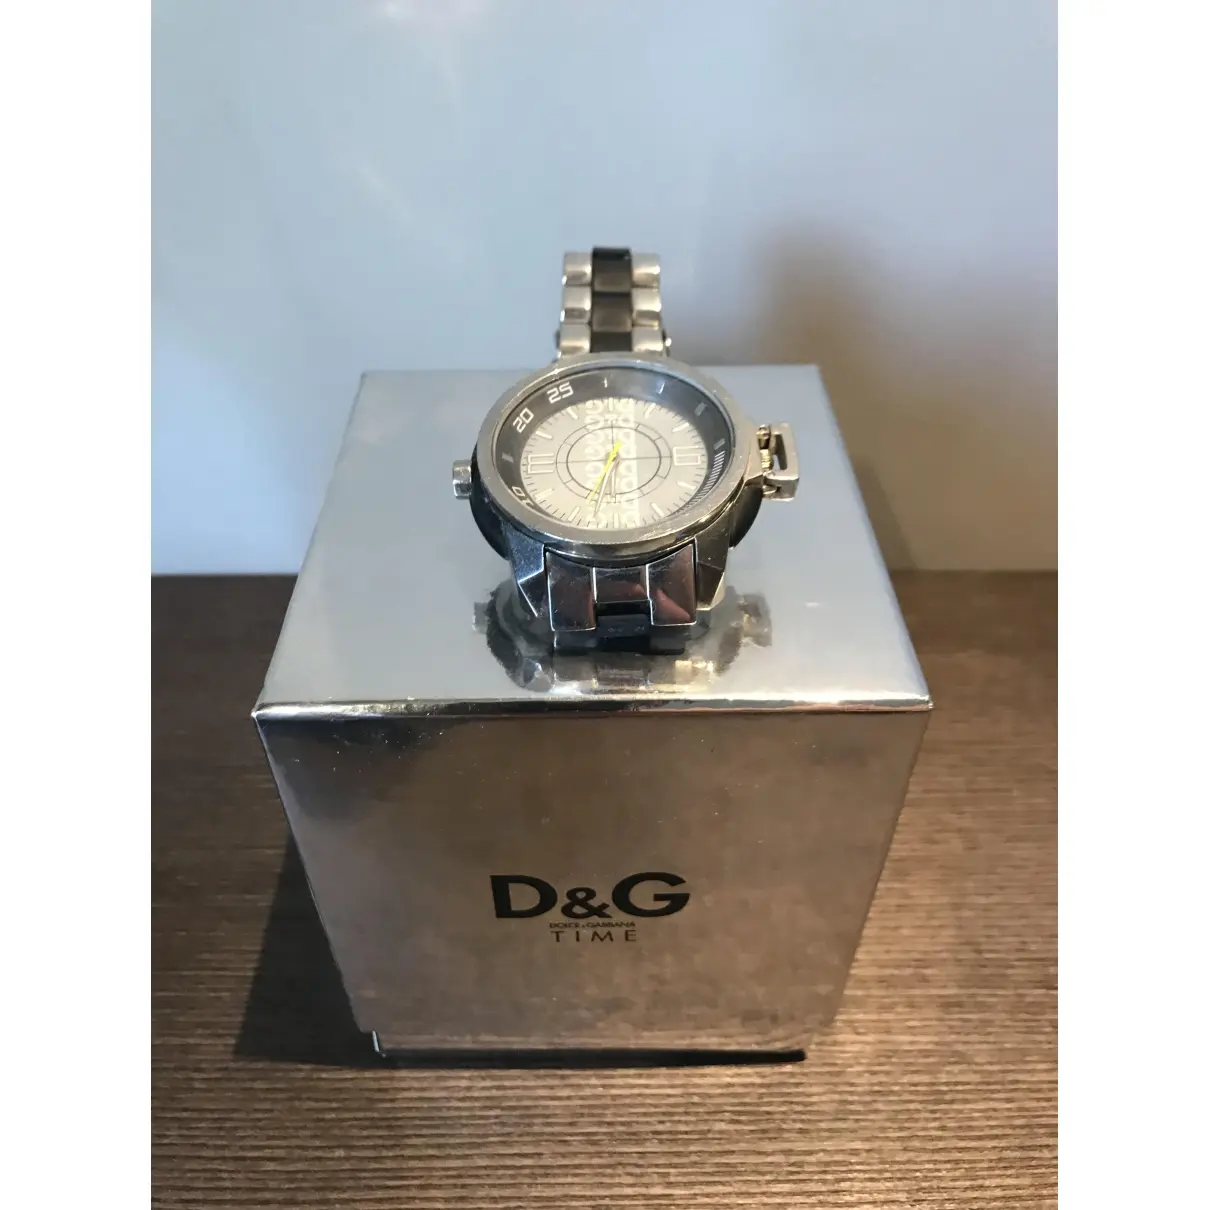 D&G Watch for sale - Vintage